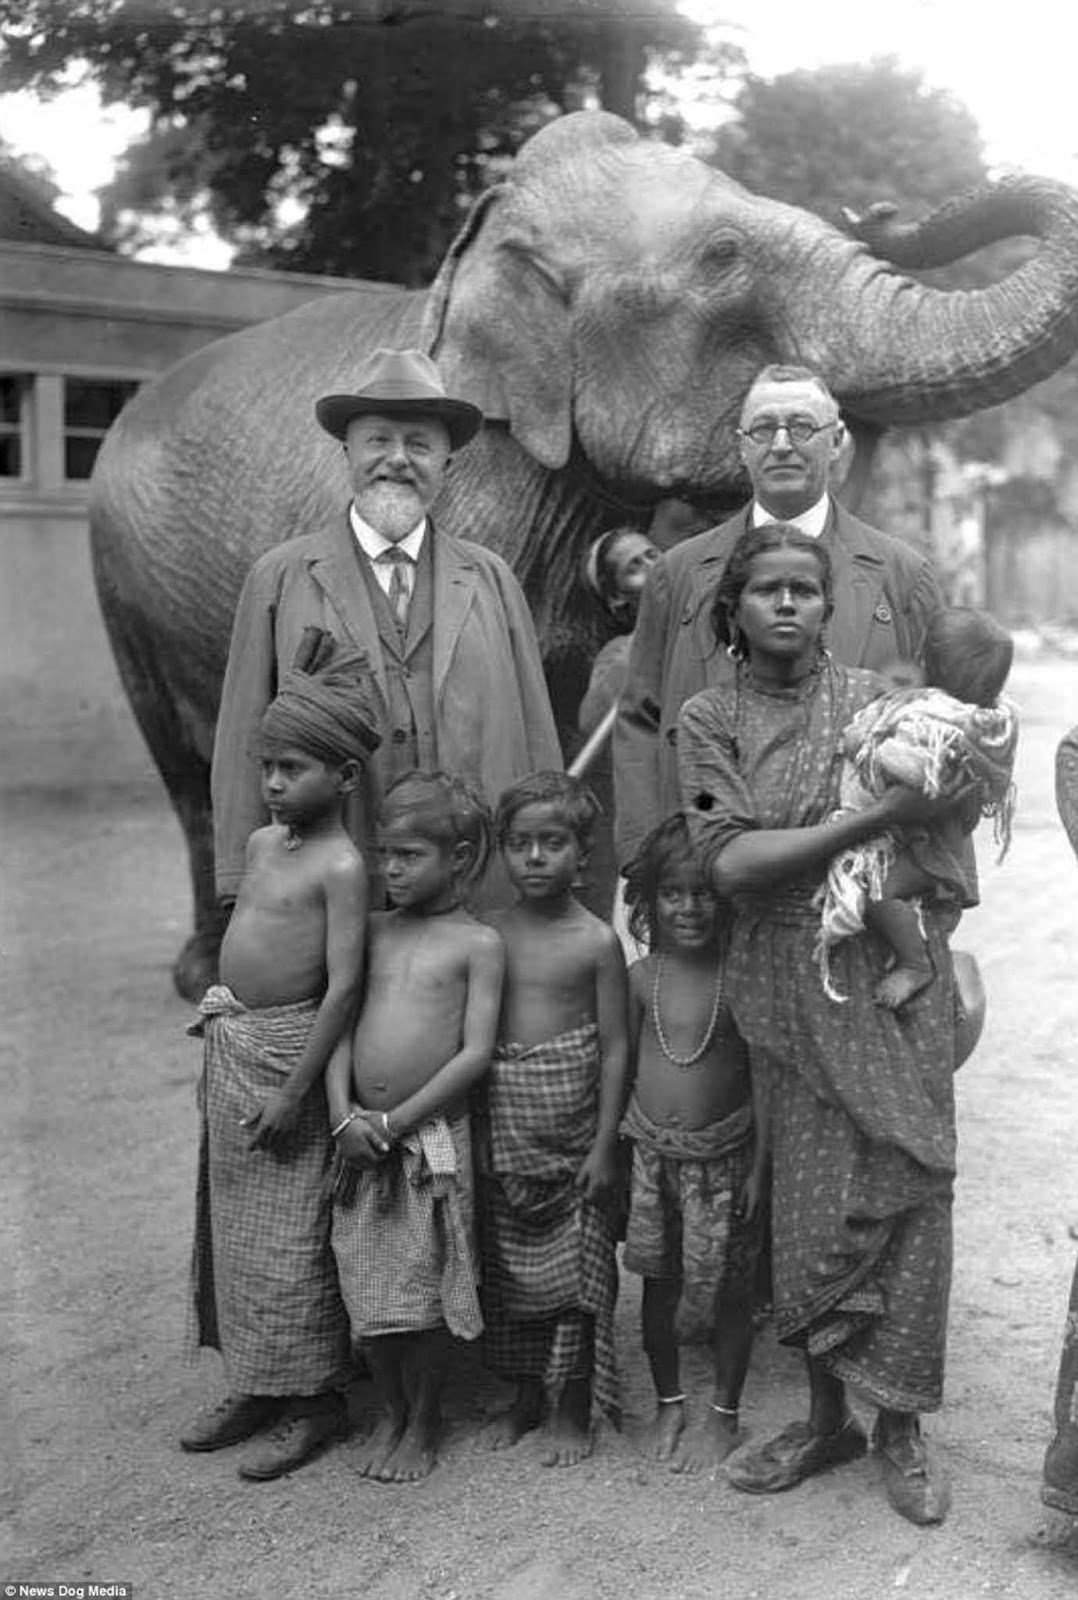 German zoologist Professor Lutz Heck (left) with an elephant and a family he brought to the Berlin Zoo, in Germany in 1931.